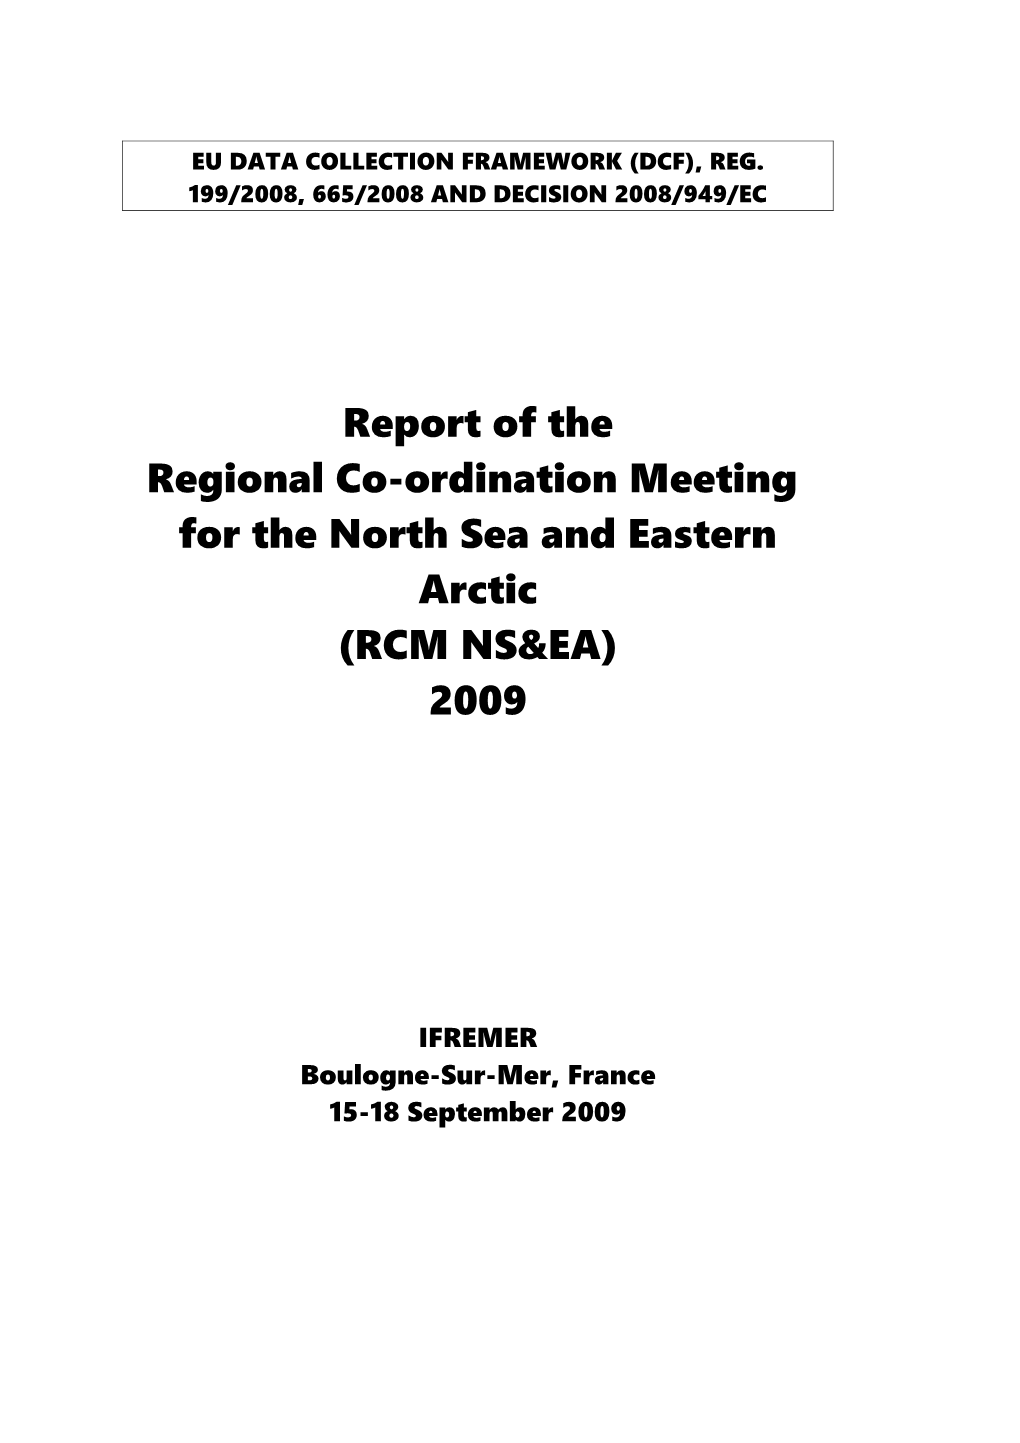 Report of the RCM North Sea and Eastern Arctic 2009